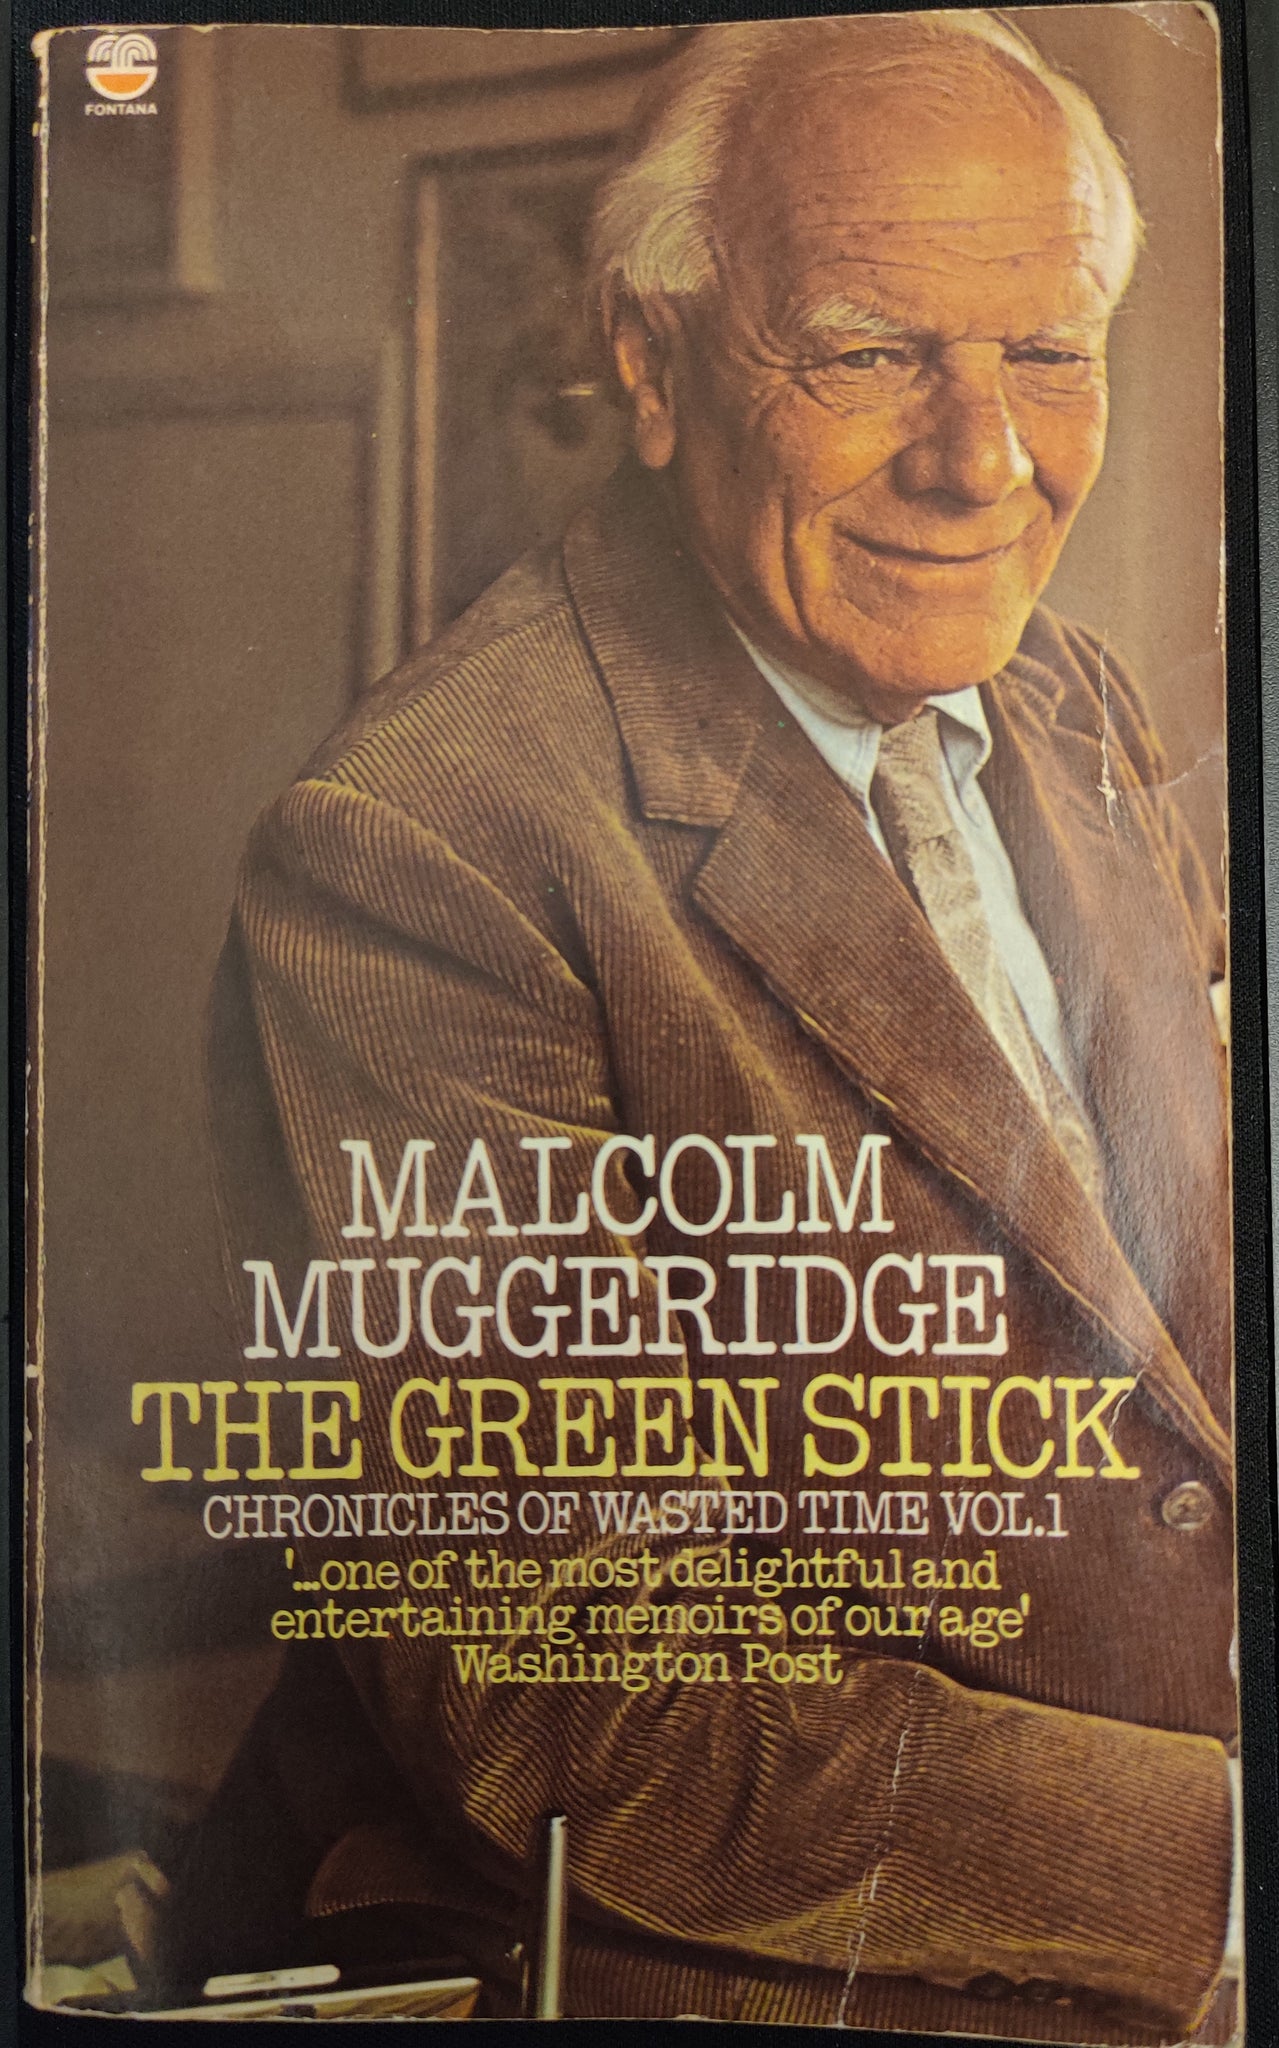 Chronicles of Wasted Time: Vol. 1: The Green Stick by Malcolm Muggeridge